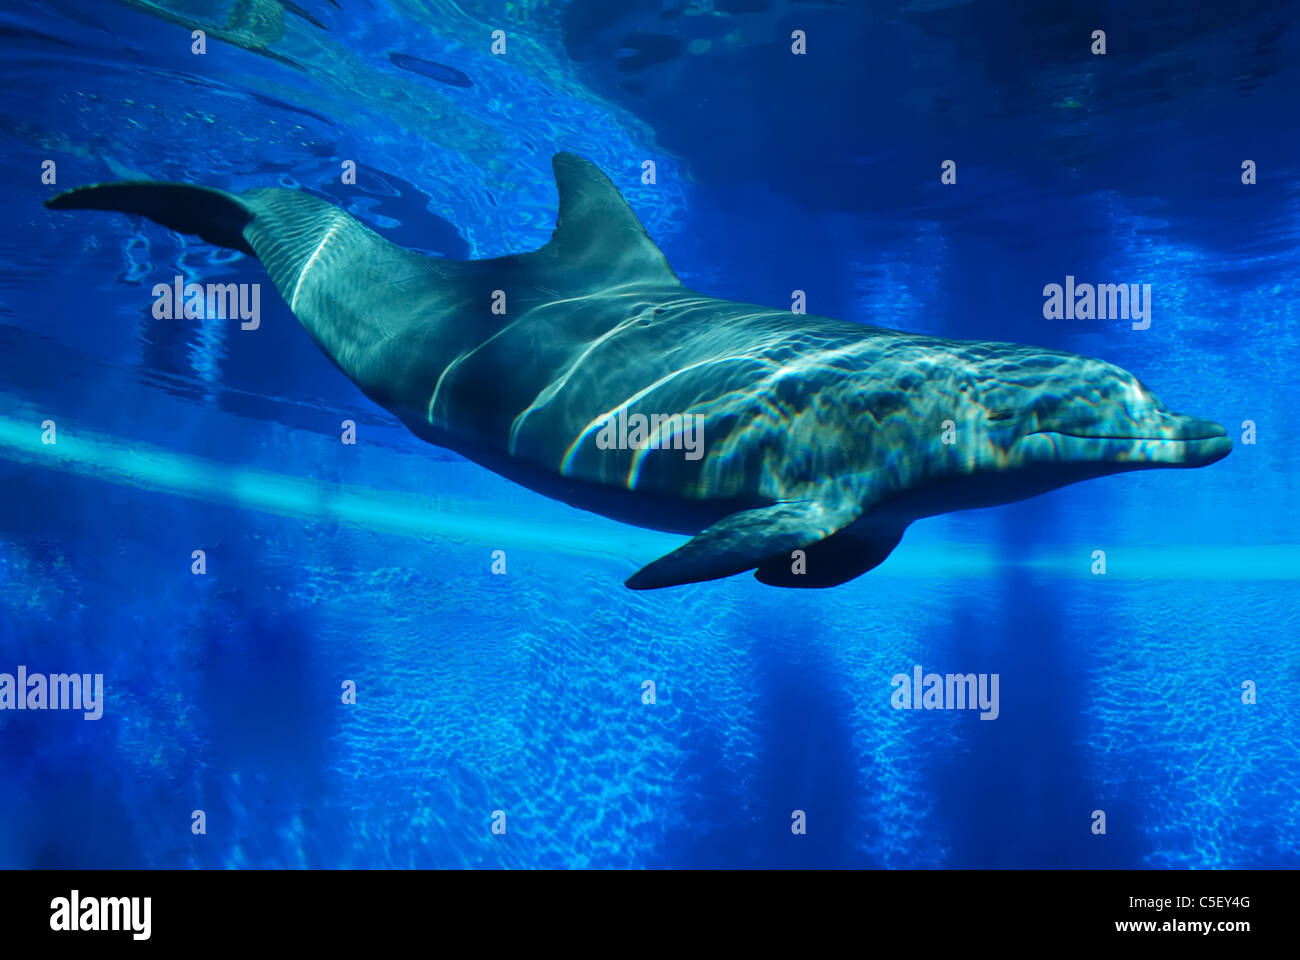 Dolphin swimming in large aquarium with deep blue background at the Mirage Hotel, Las Vegas. Stock Photo